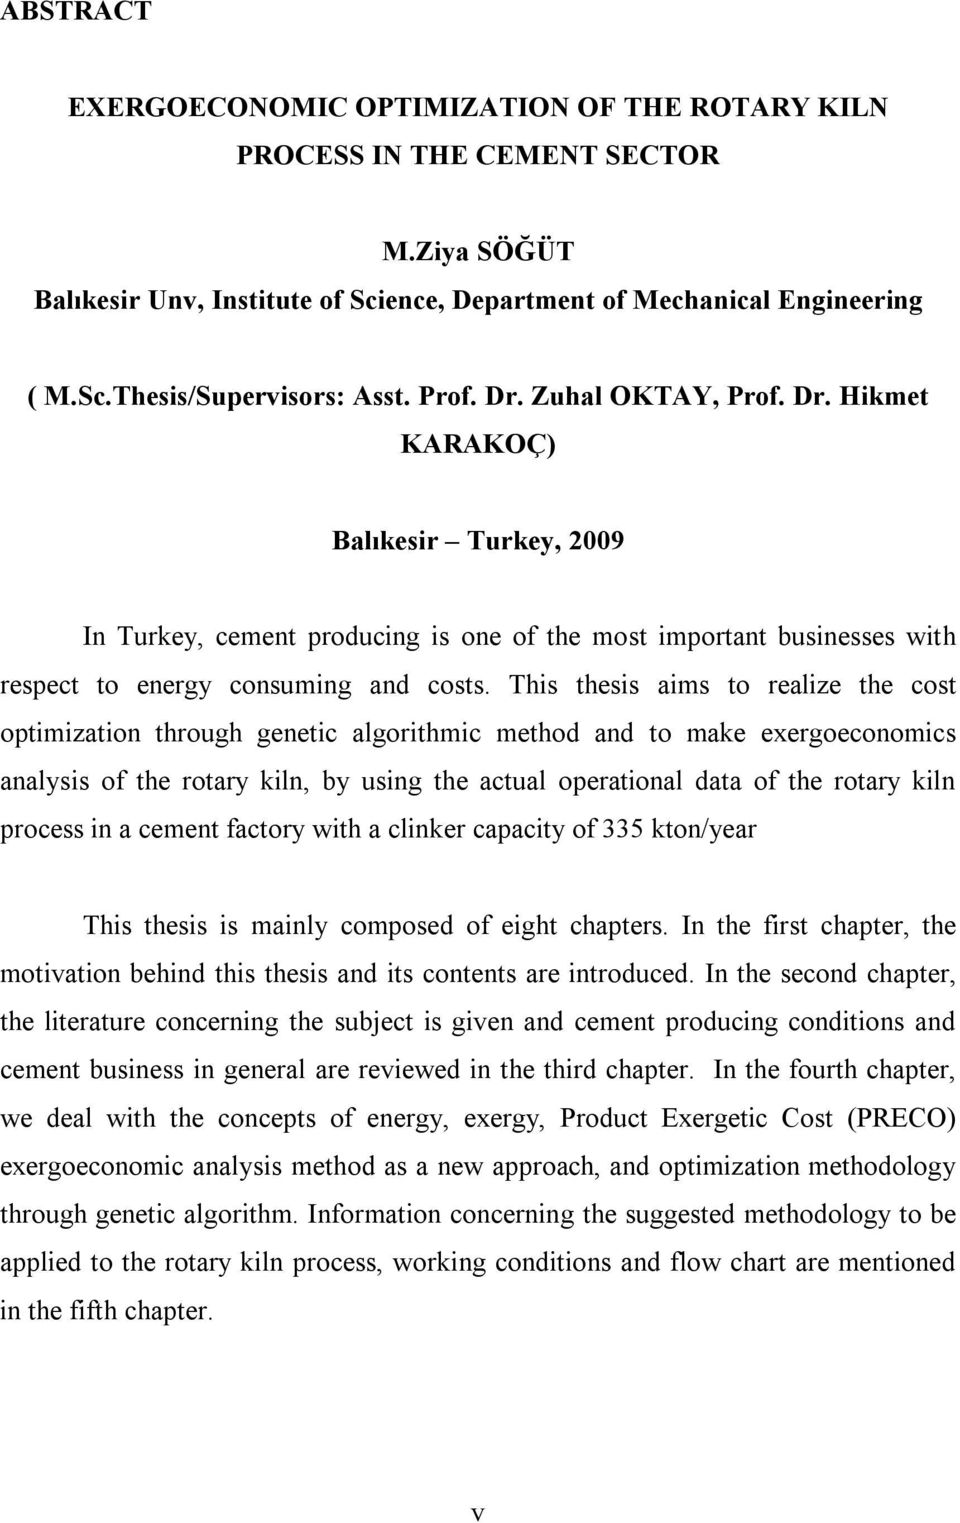 This thesis aims to realize the cost optimization through genetic algorithmic method and to make exergoeconomics analysis of the rotary kiln, by using the actual operational data of the rotary kiln